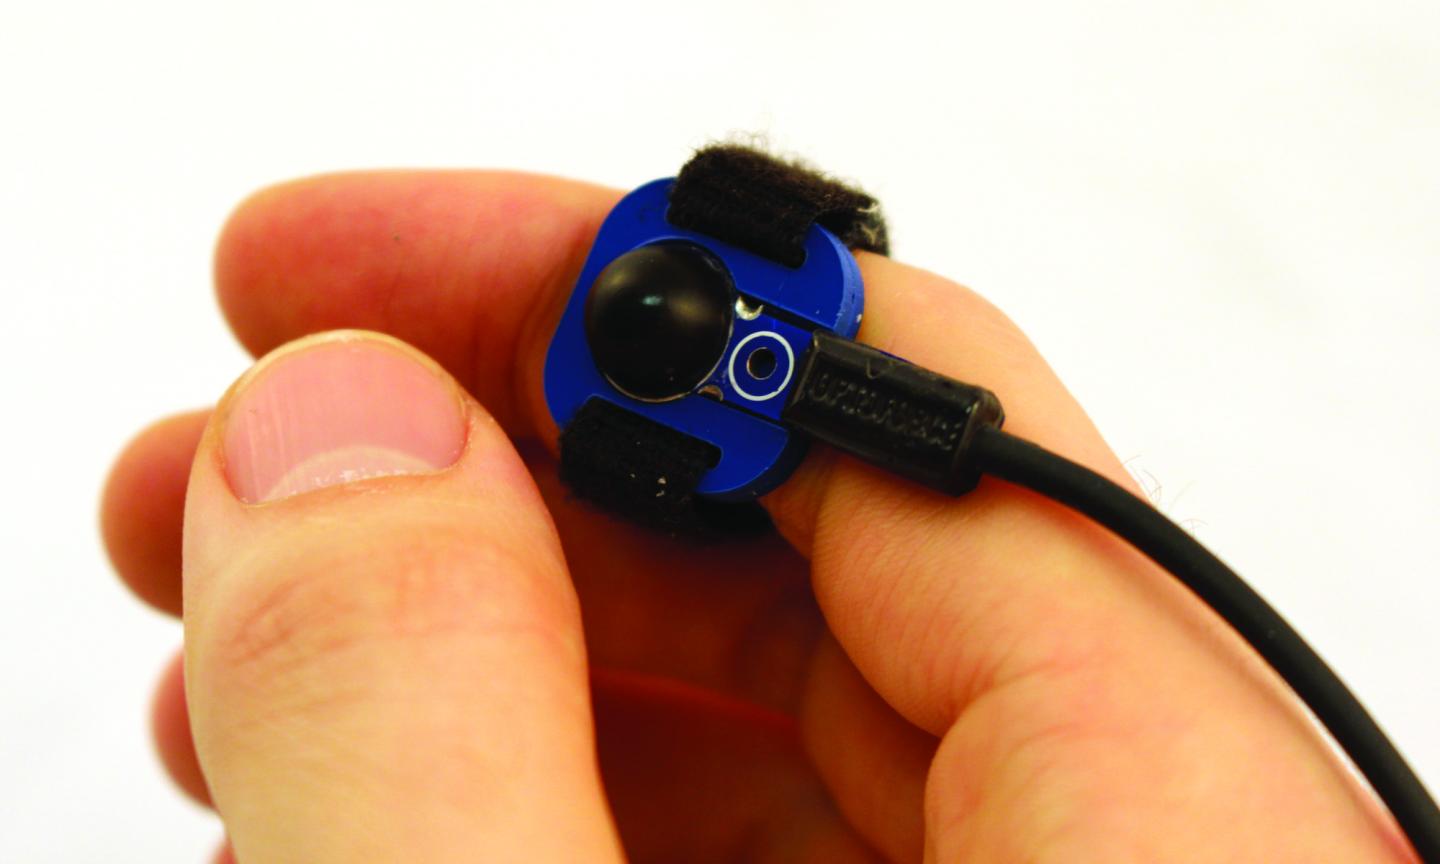 Mobile On-Body Devices Can Be Precisely and Discreetly Controlled using a Tiny Sensor